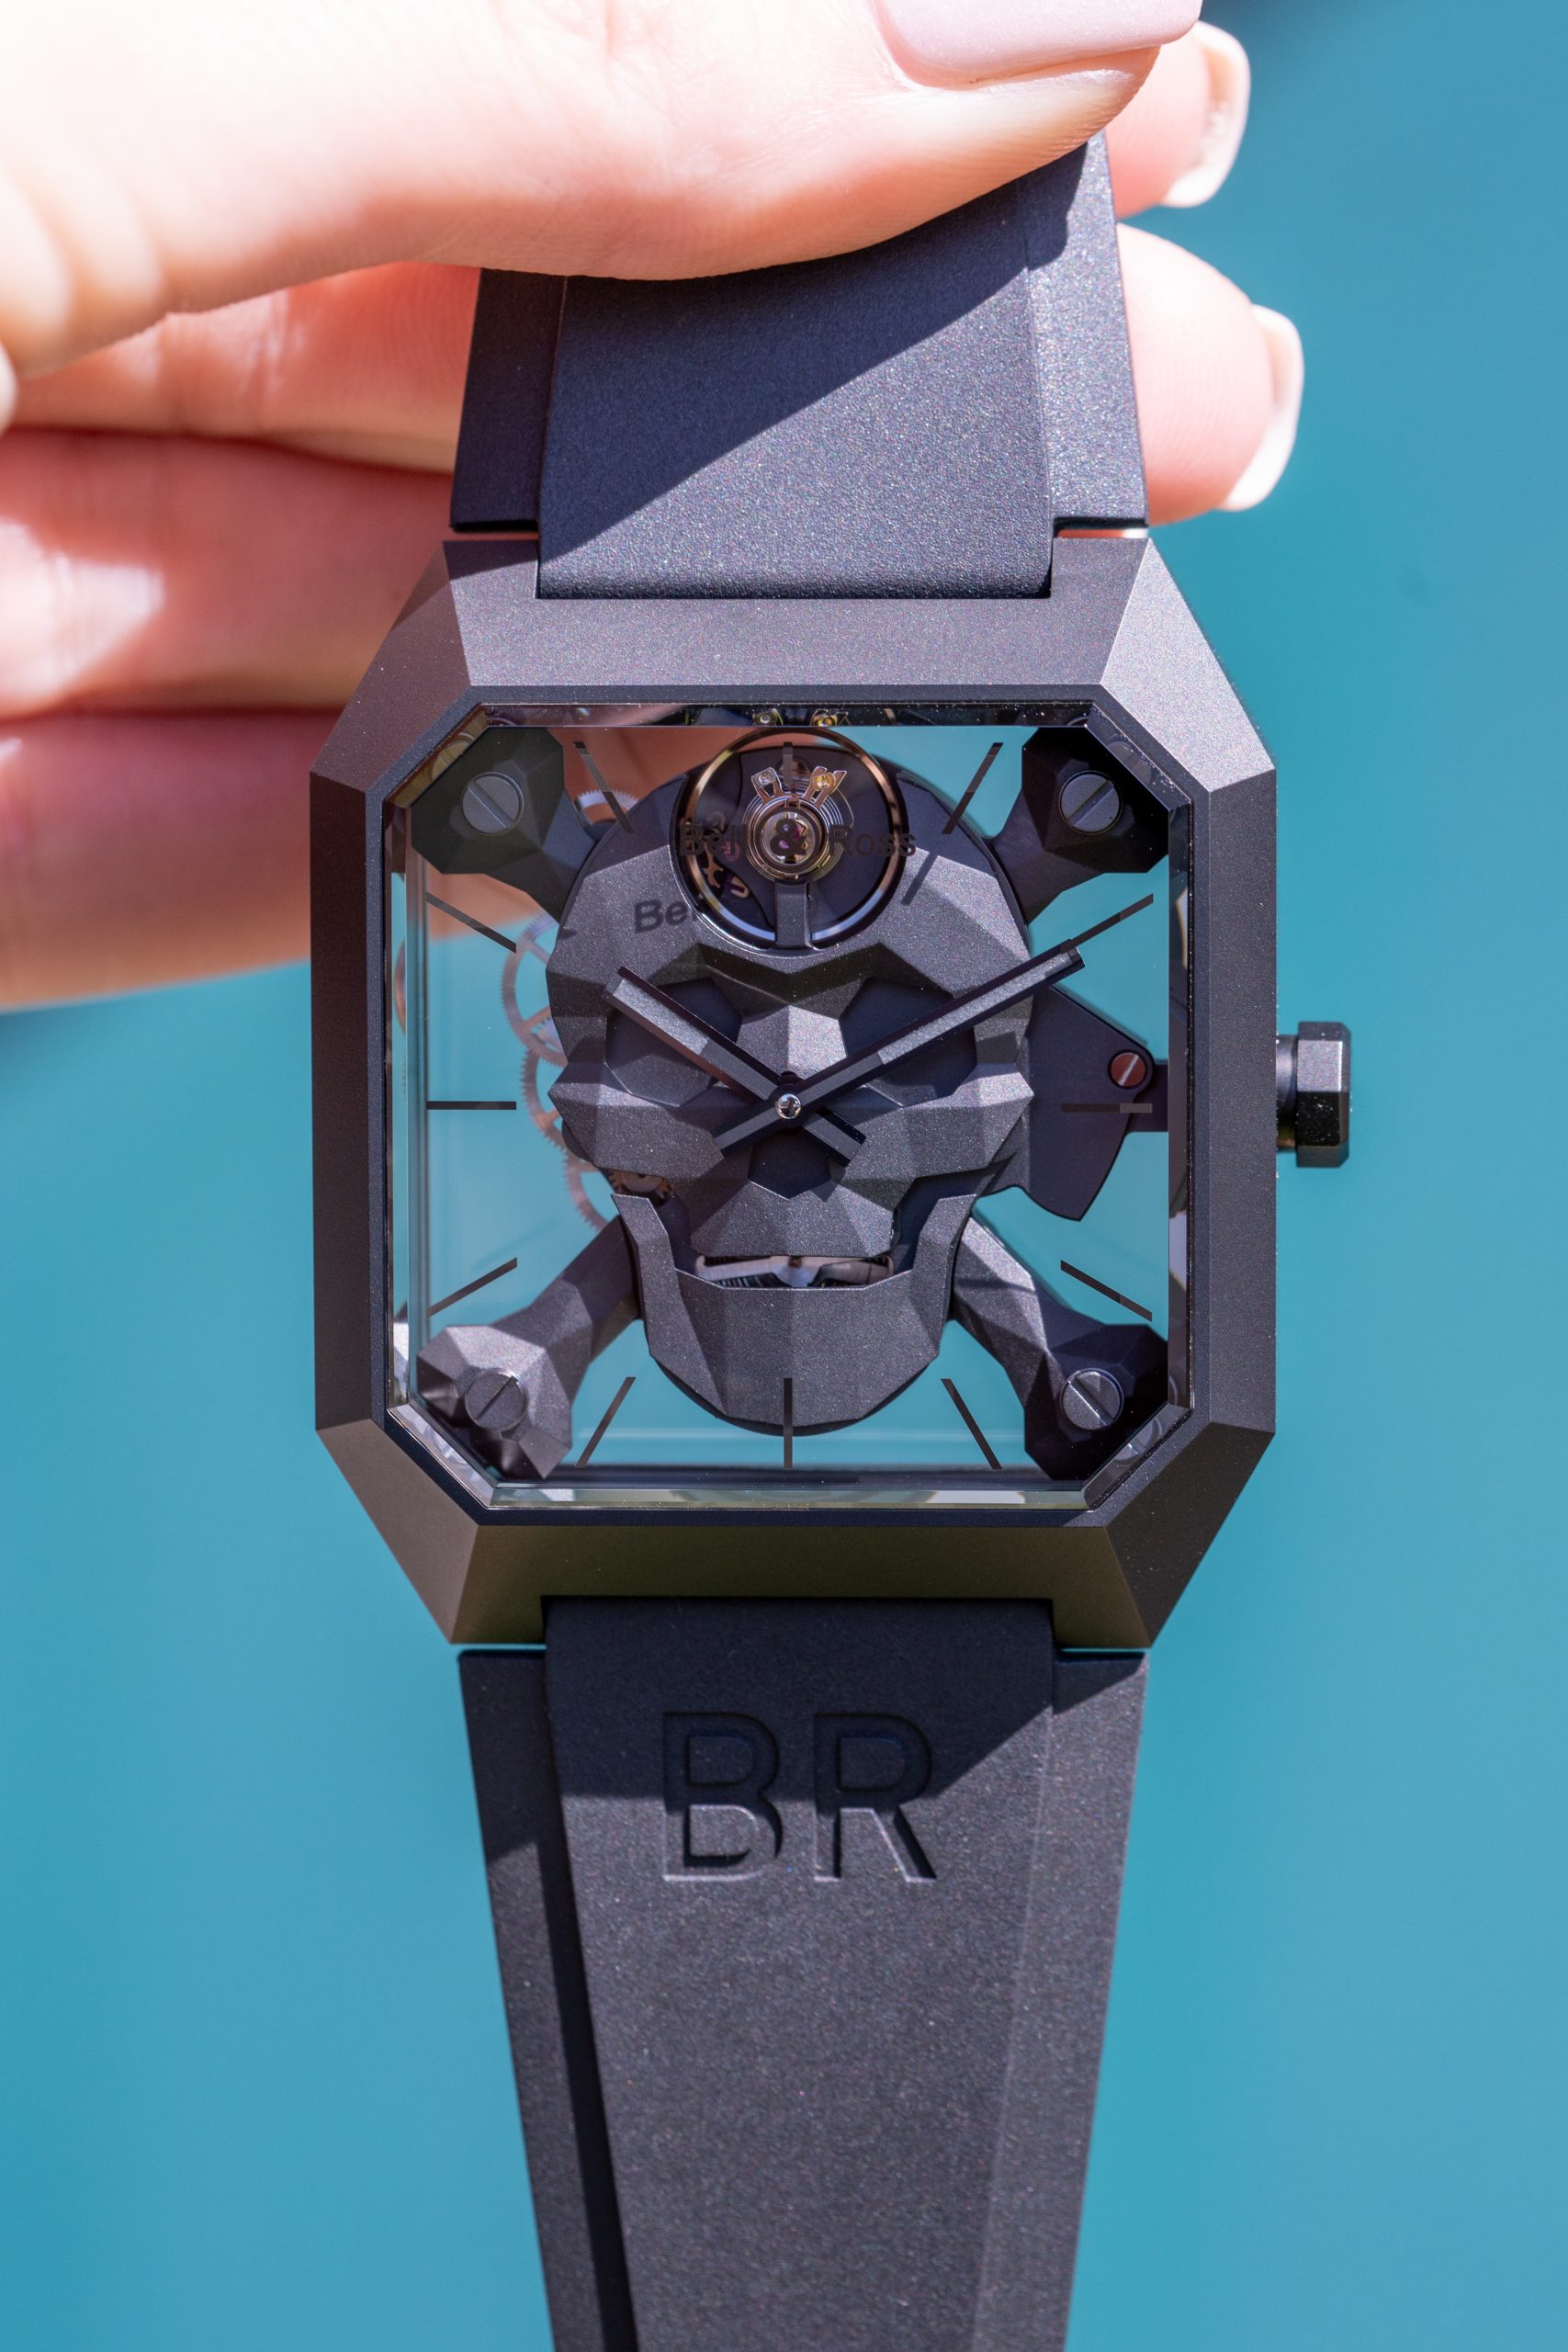 An iconic design from the Bell and Ross brand